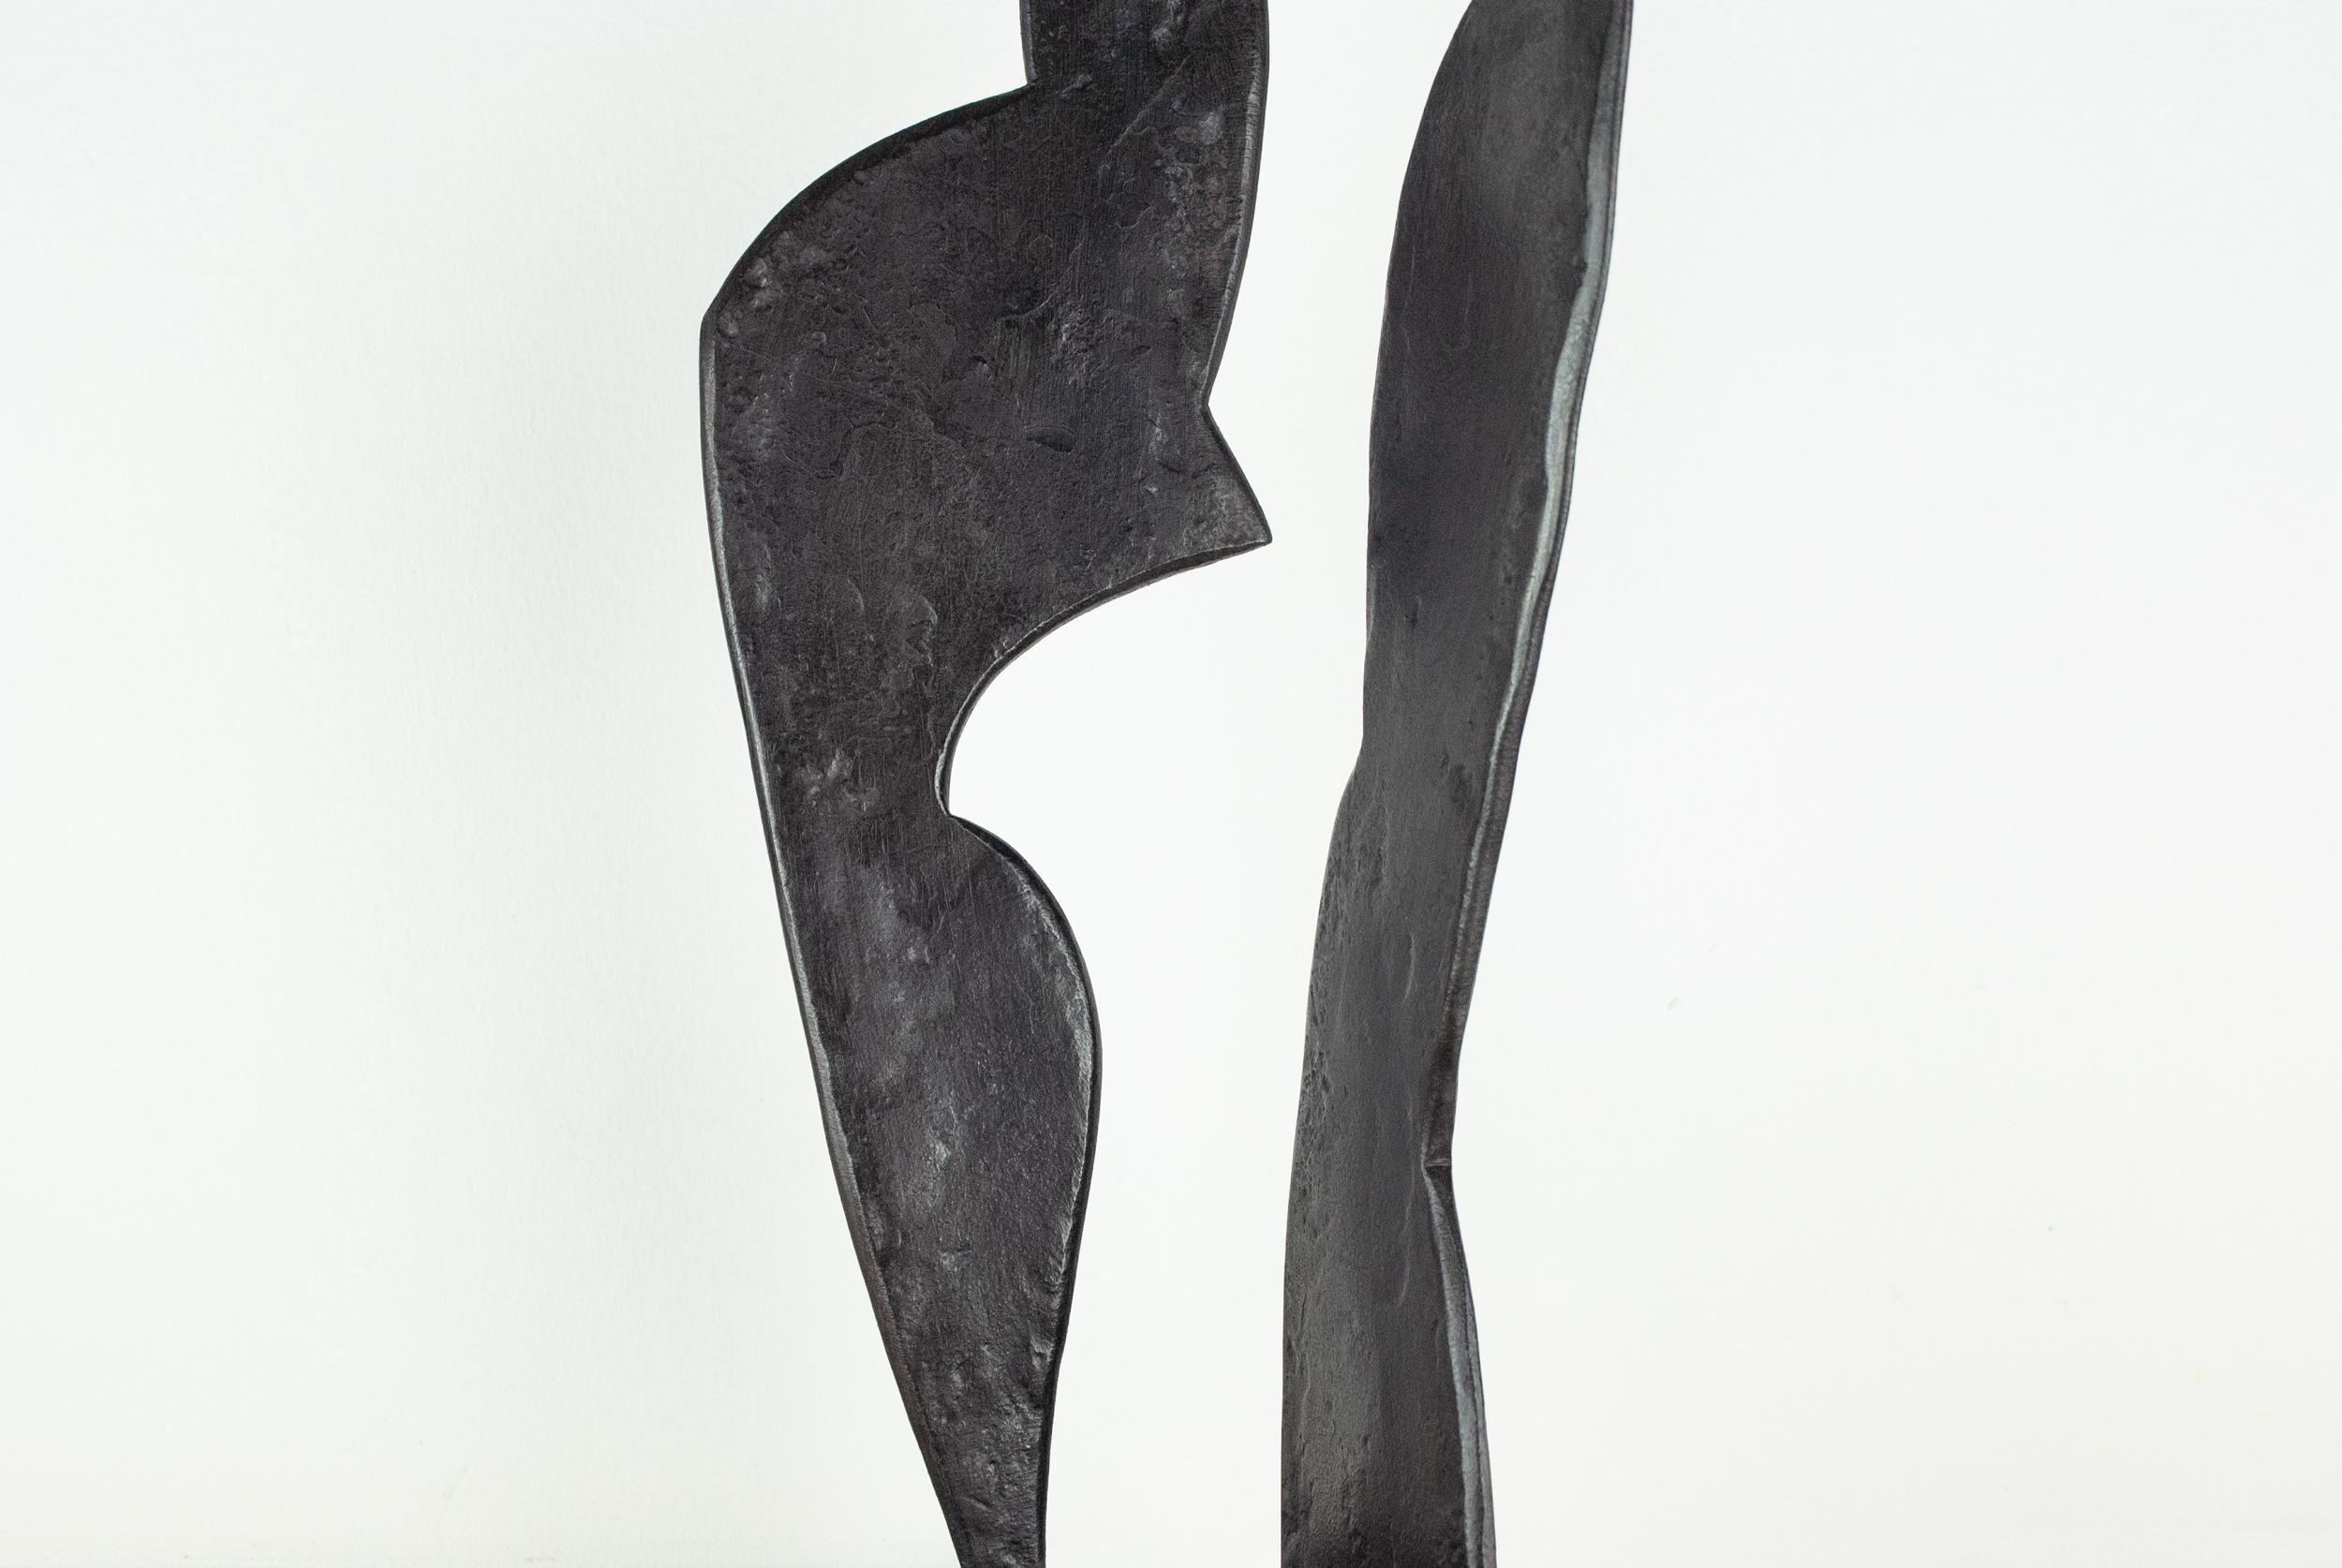 Contemporary Black Forged Steel Sculpture Inspired by H. Bertoia - Two Forms 02 im Zustand „Neu“ im Angebot in London, GB